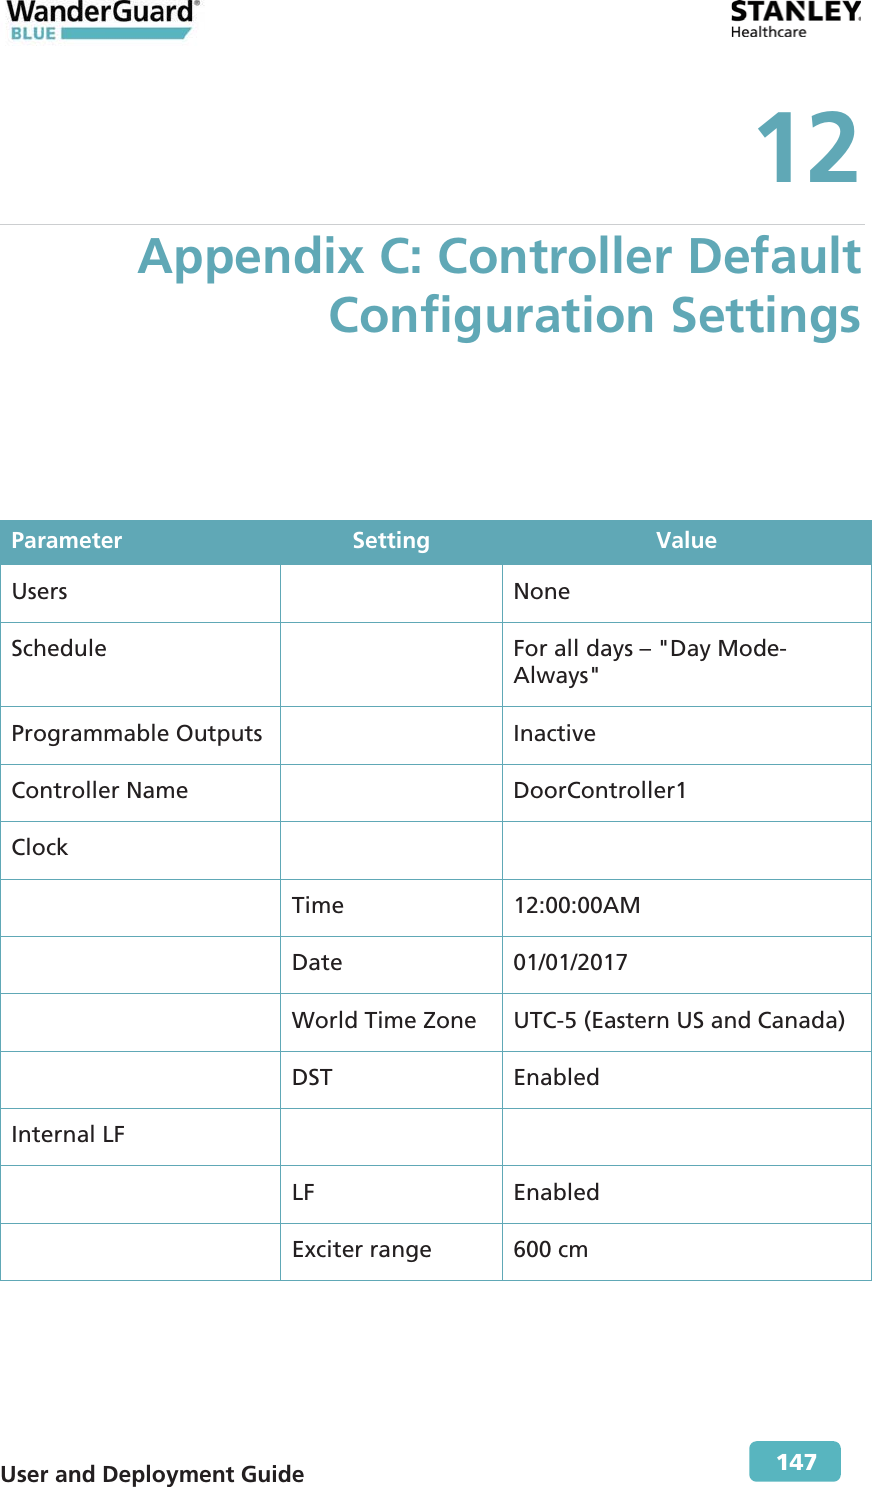  User and Deployment Guide        147 12 Appendix C: Controller Default Configuration Settings Parameter  Setting Value Users  None Schedule    For all days – &quot;Day Mode-Always&quot; Programmable Outputs     Inactive Controller Name DoorController1Clock    Time 12:00:00AM  Date 01/01/2017  World Time Zone  UTC-5 (Eastern US and Canada)  DST Enabled Internal LF      LF Enabled  Exciter range 600 cm 